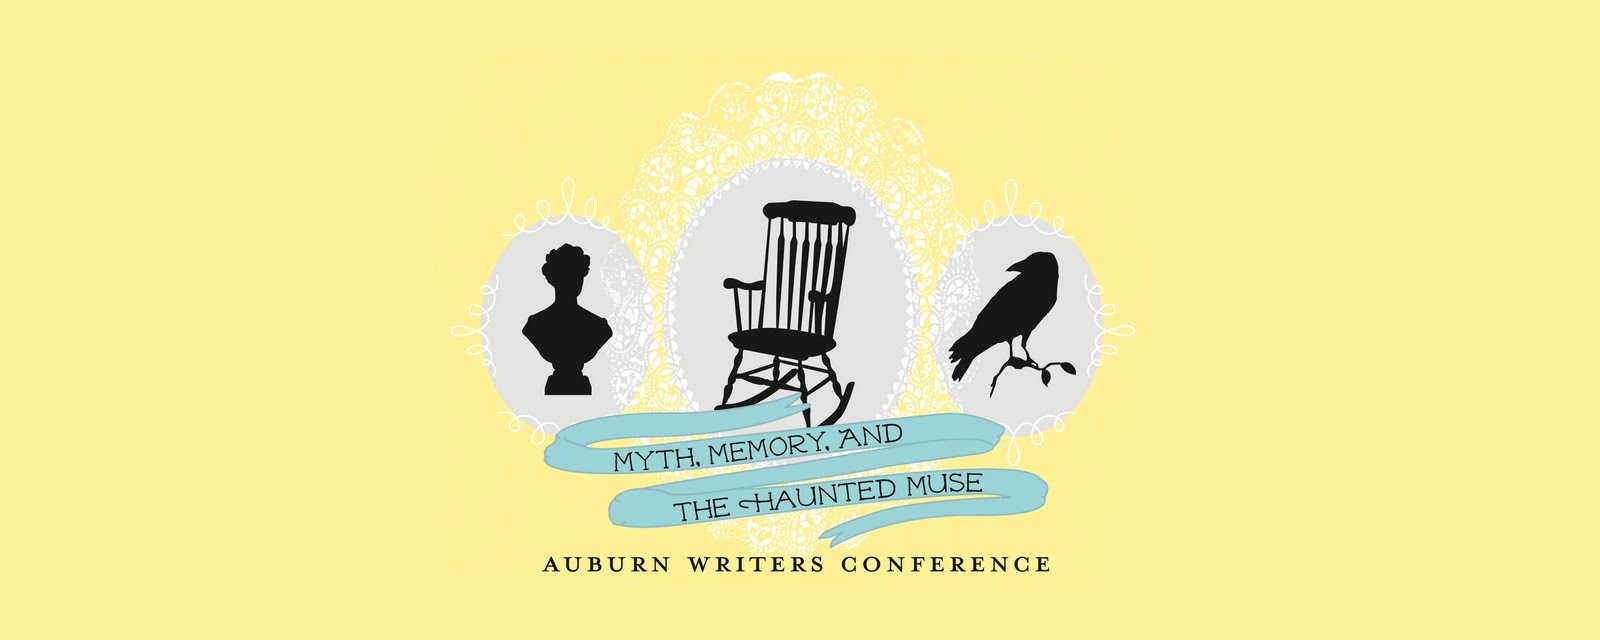 The Auburn Writers Conference